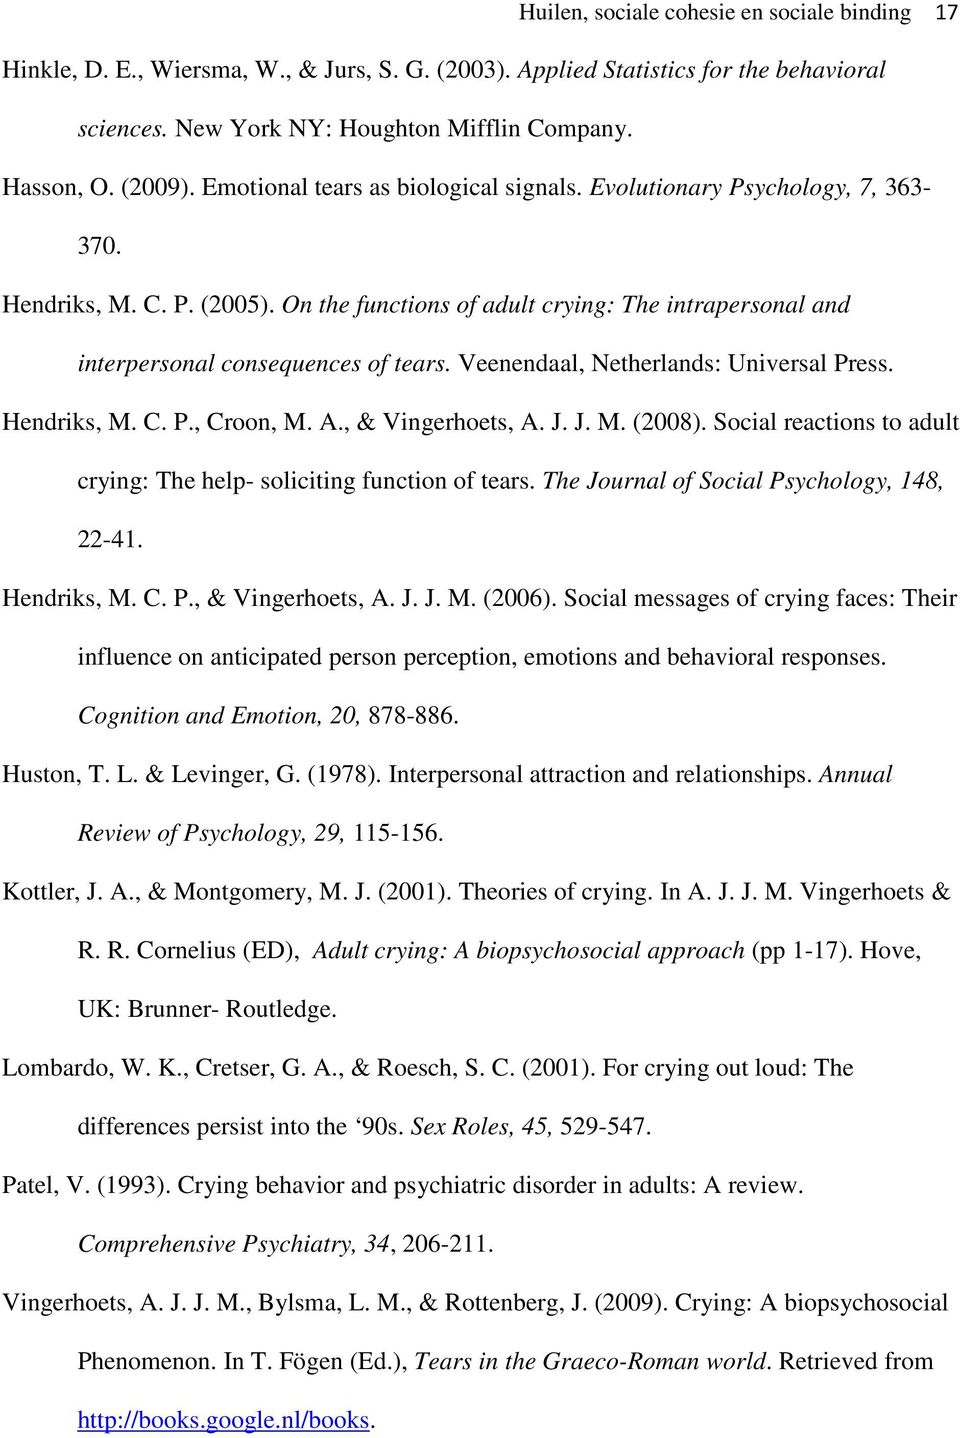 On the functions of adult crying: The intrapersonal and interpersonal consequences of tears. Veenendaal, Netherlands: Universal Press. Hendriks, M. C. P., Croon, M. A., & Vingerhoets, A. J. J. M. (2008).